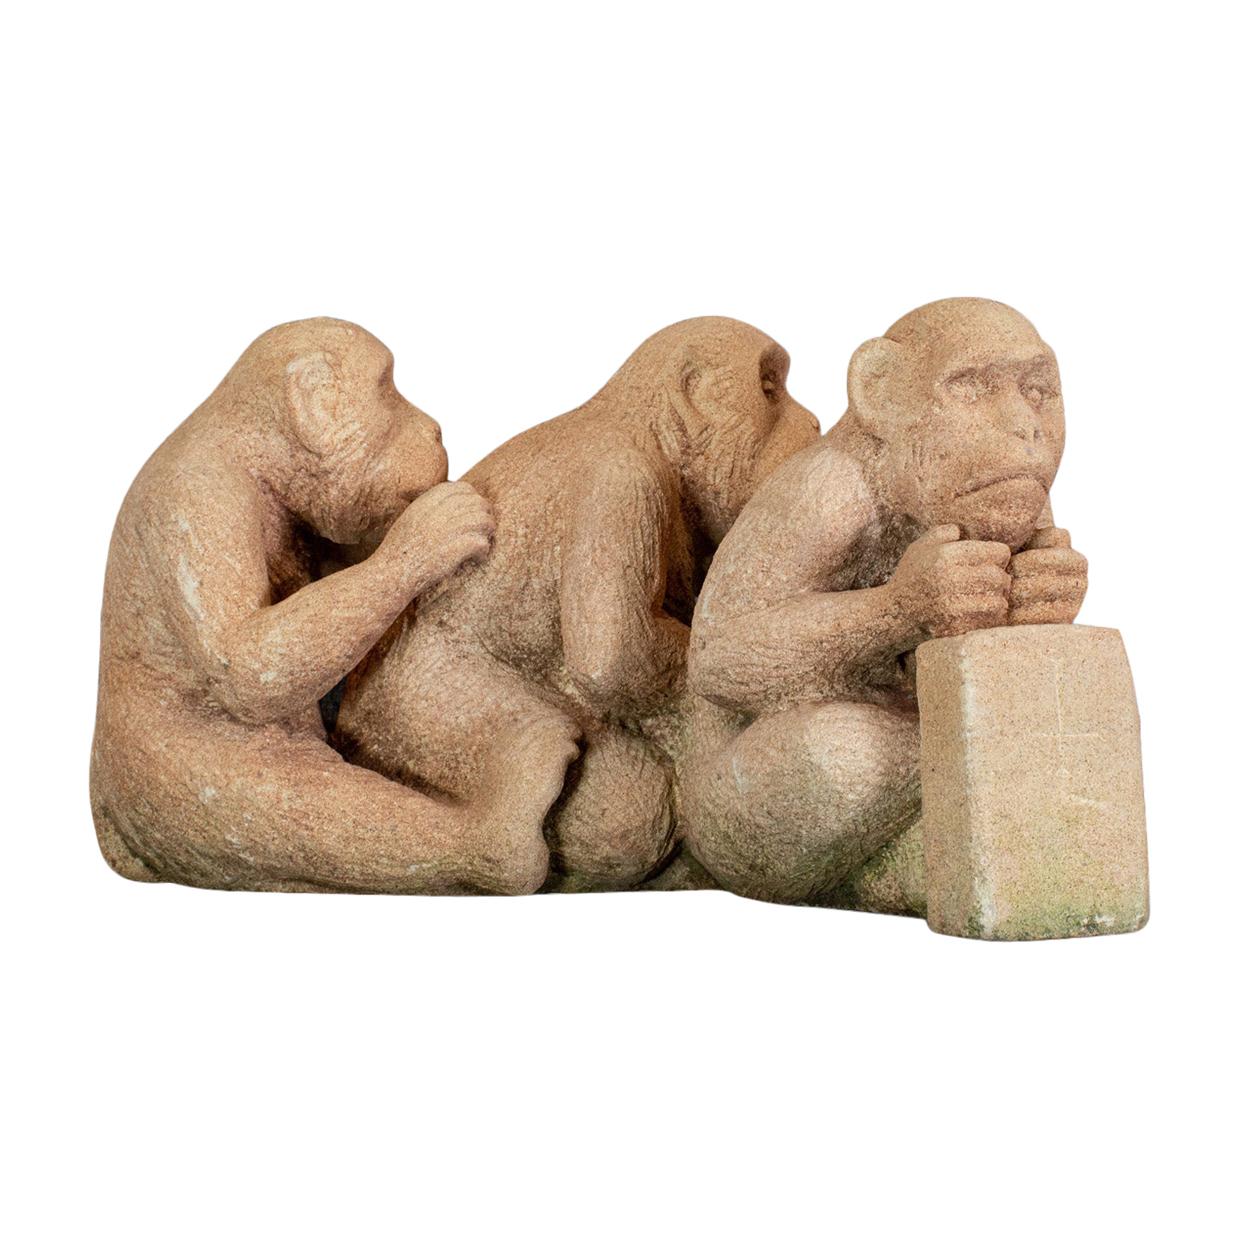 Sculpture of Sitting Macaques, English, Bath Stone, Dominic Hurley